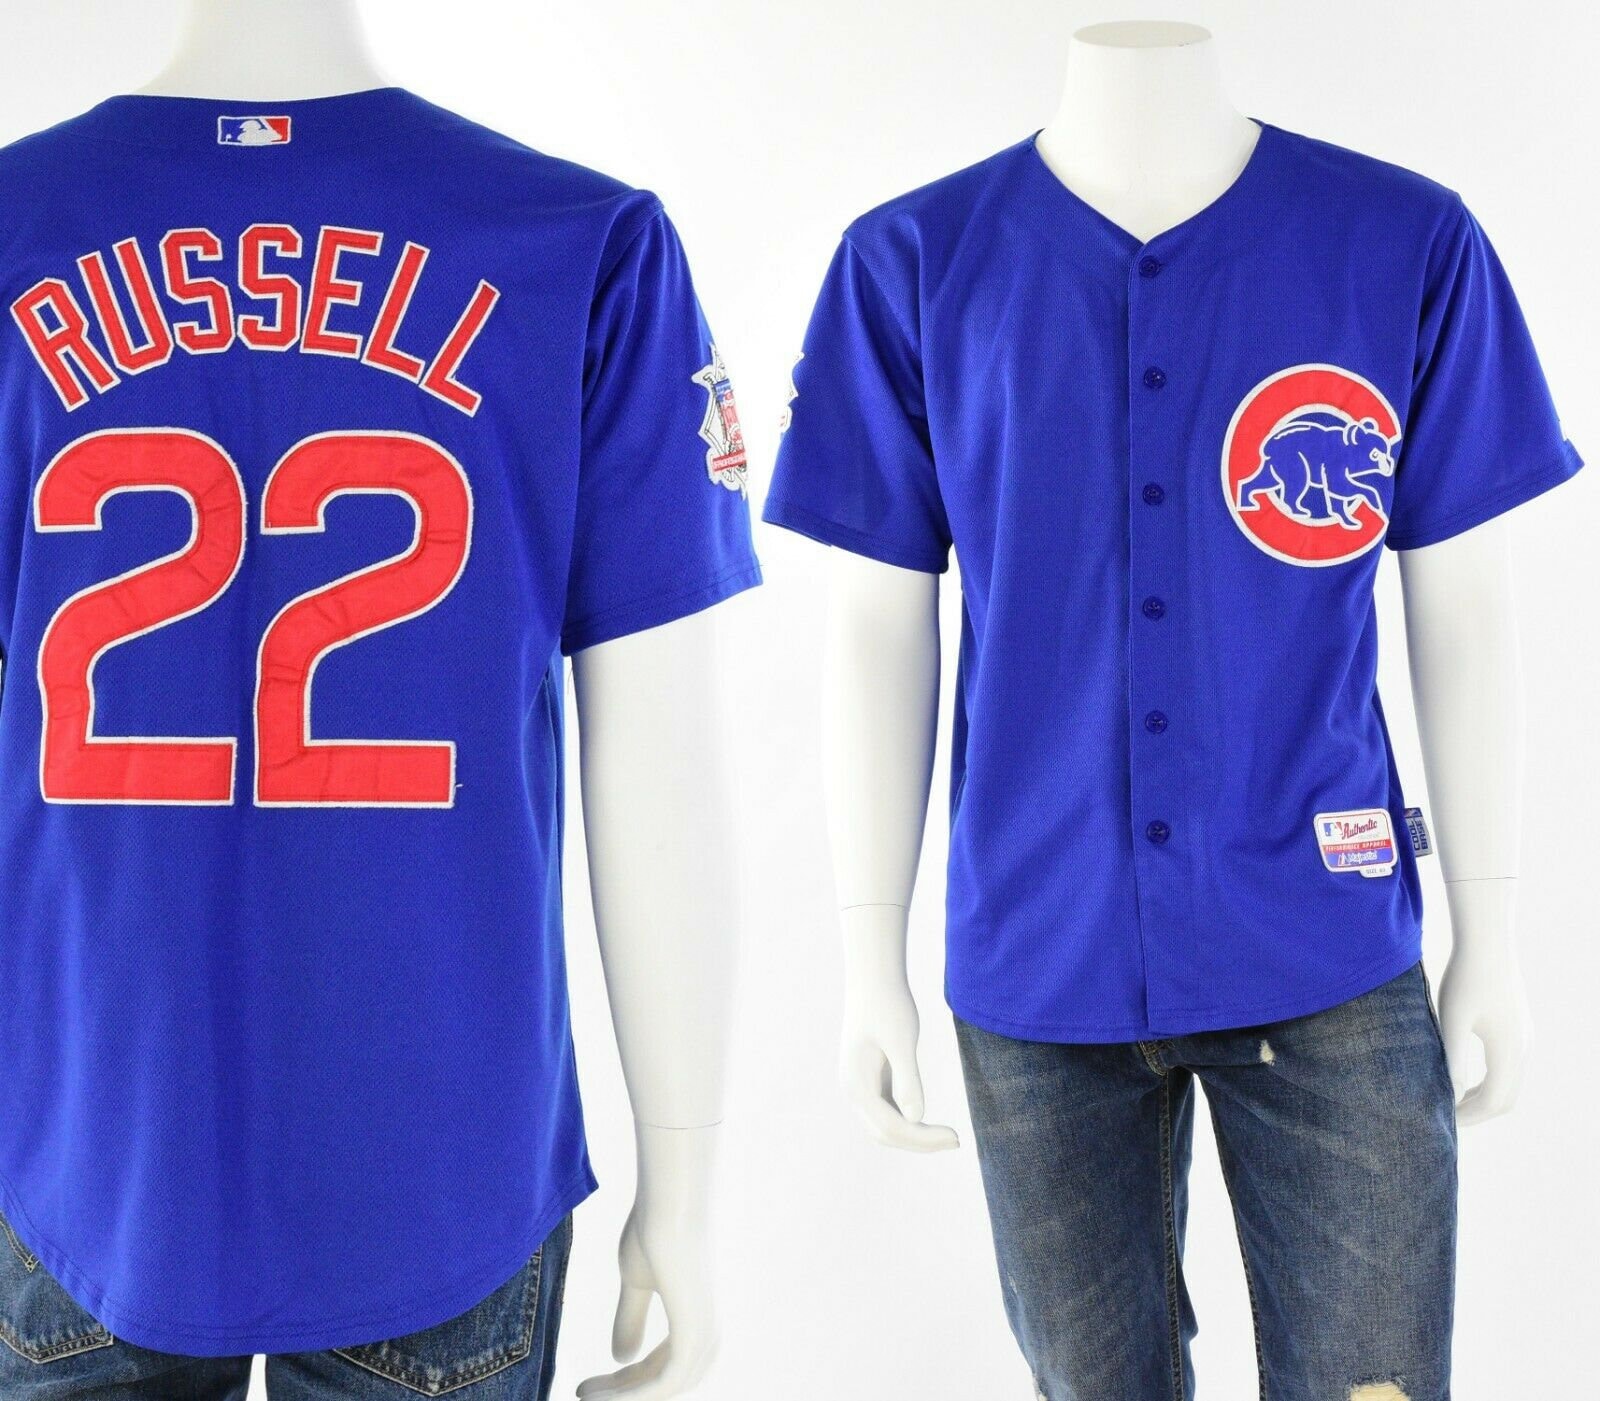 Mens 40 Chicago Cubs Baseball Jersey 22 Russell Majestic 